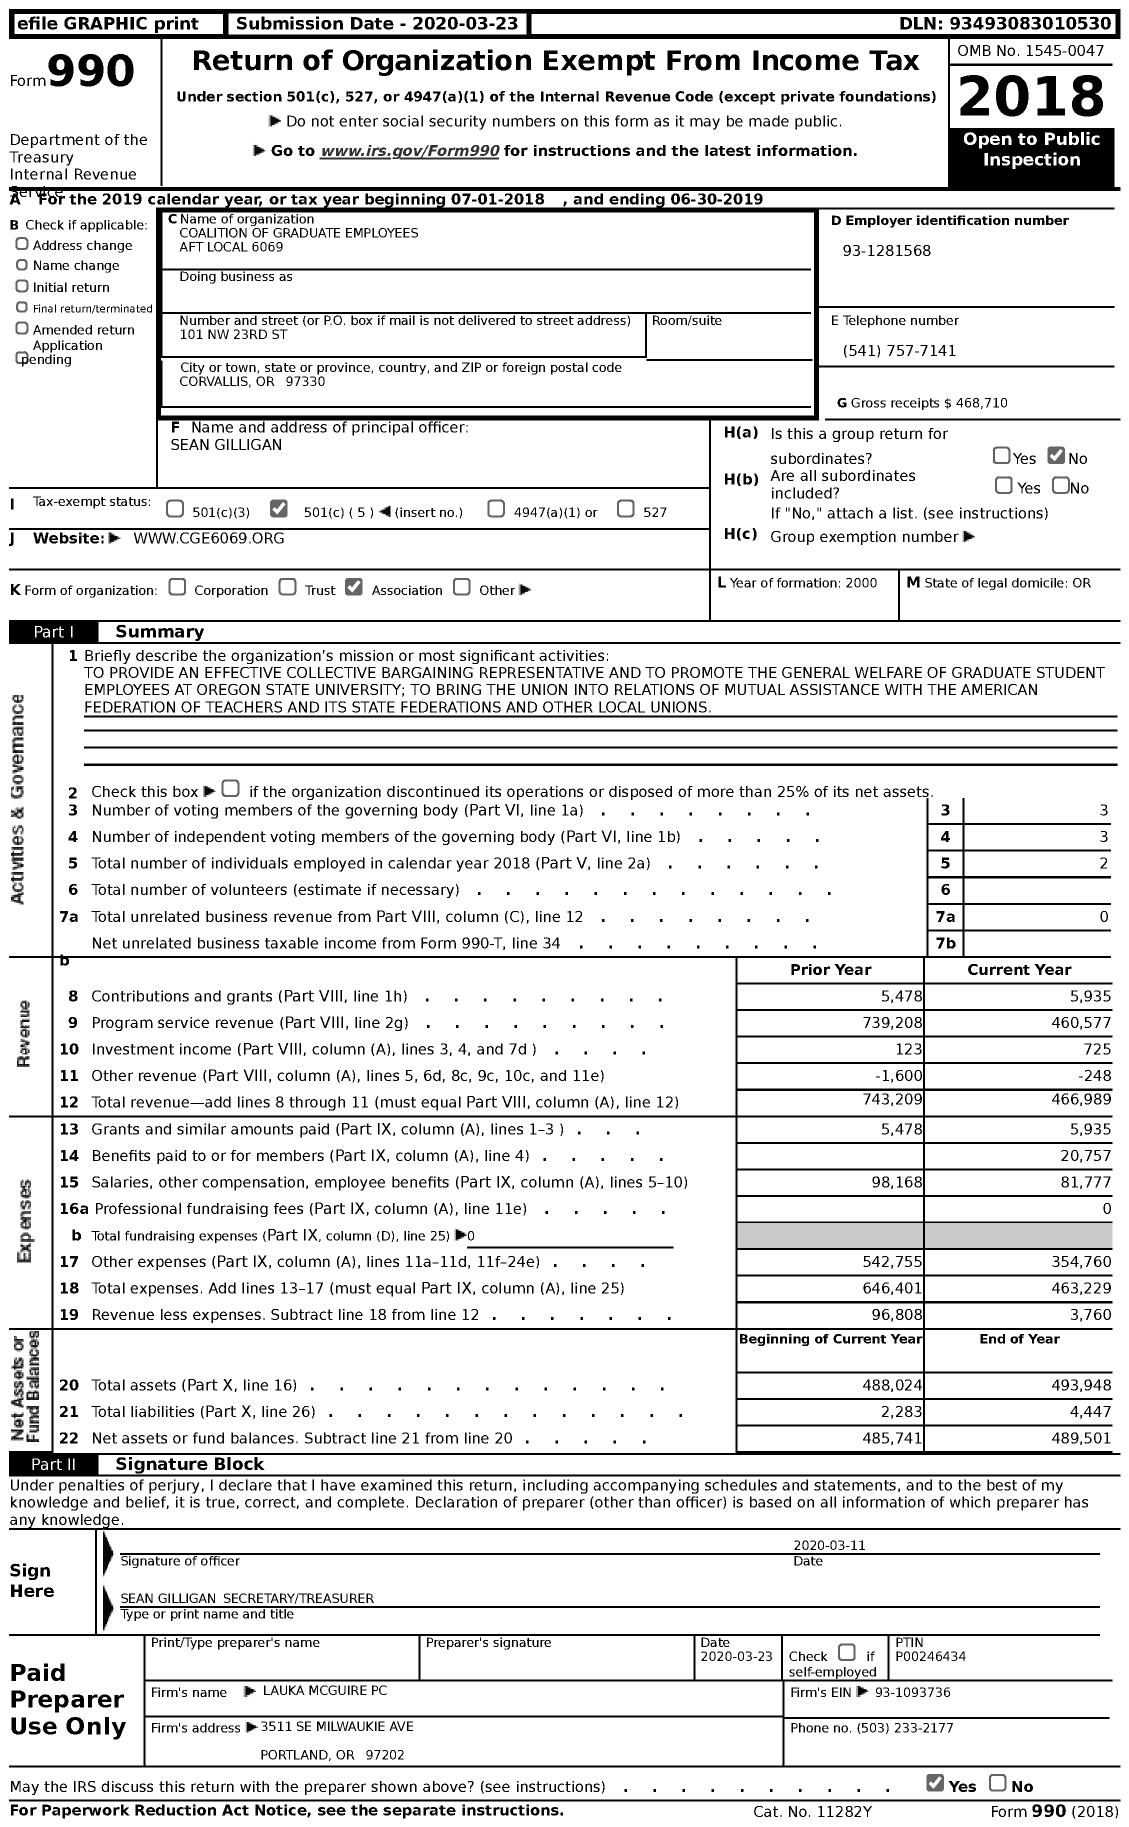 Image of first page of 2018 Form 990 for American Federation of Teachers - 6069 Coalition of Graduate Employee